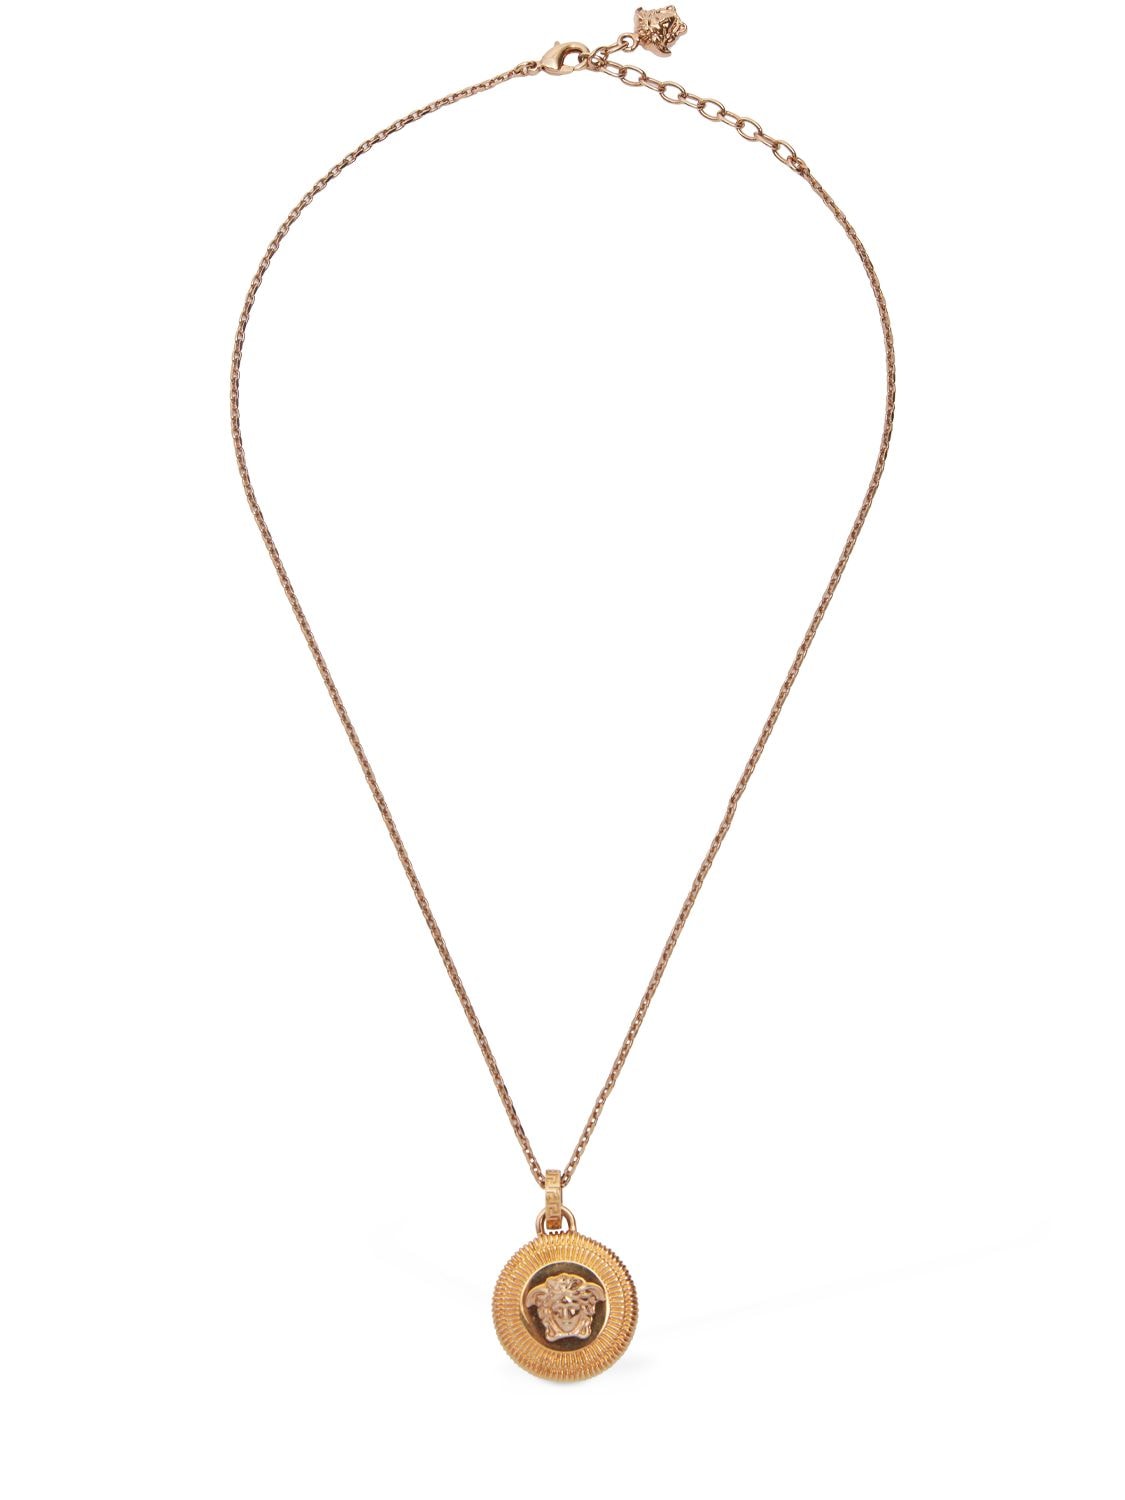 Versace Medusa Tribute Charm Necklace In Gold